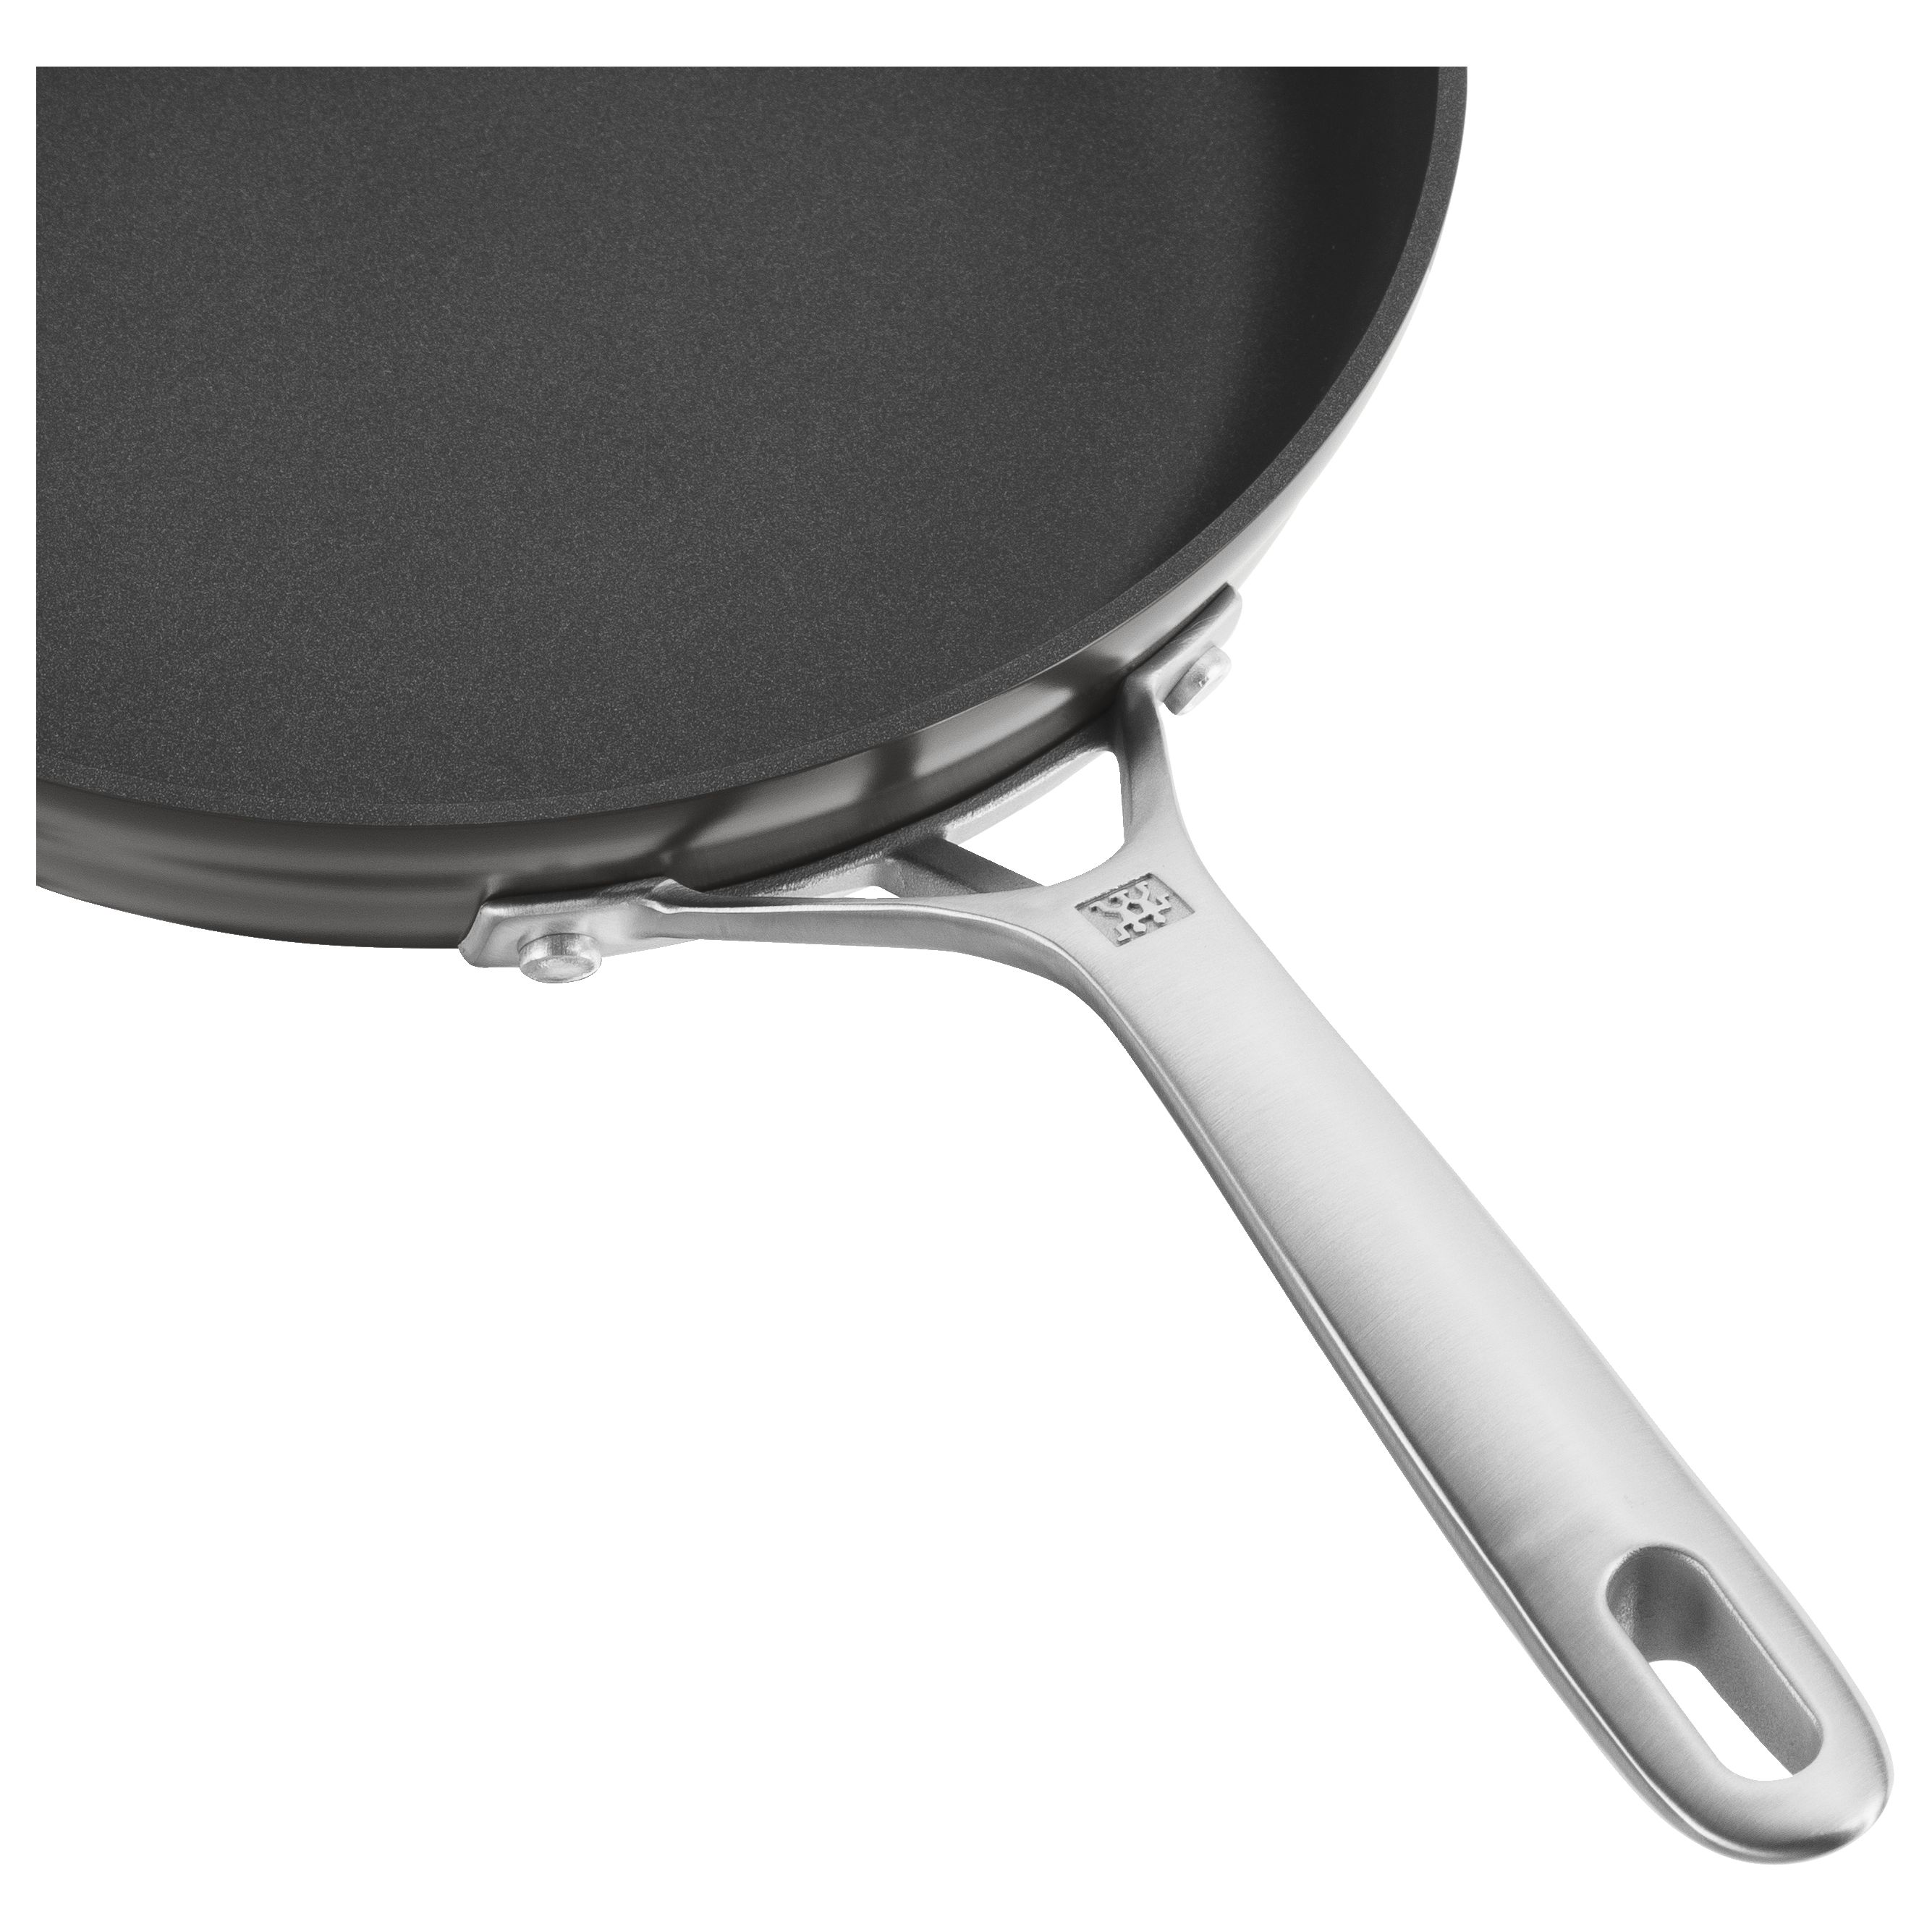 ZWILLING J.A. Henckels Zwilling Motion Hard Anodized 10-inch Aluminum Nonstick  Fry Pan & Reviews